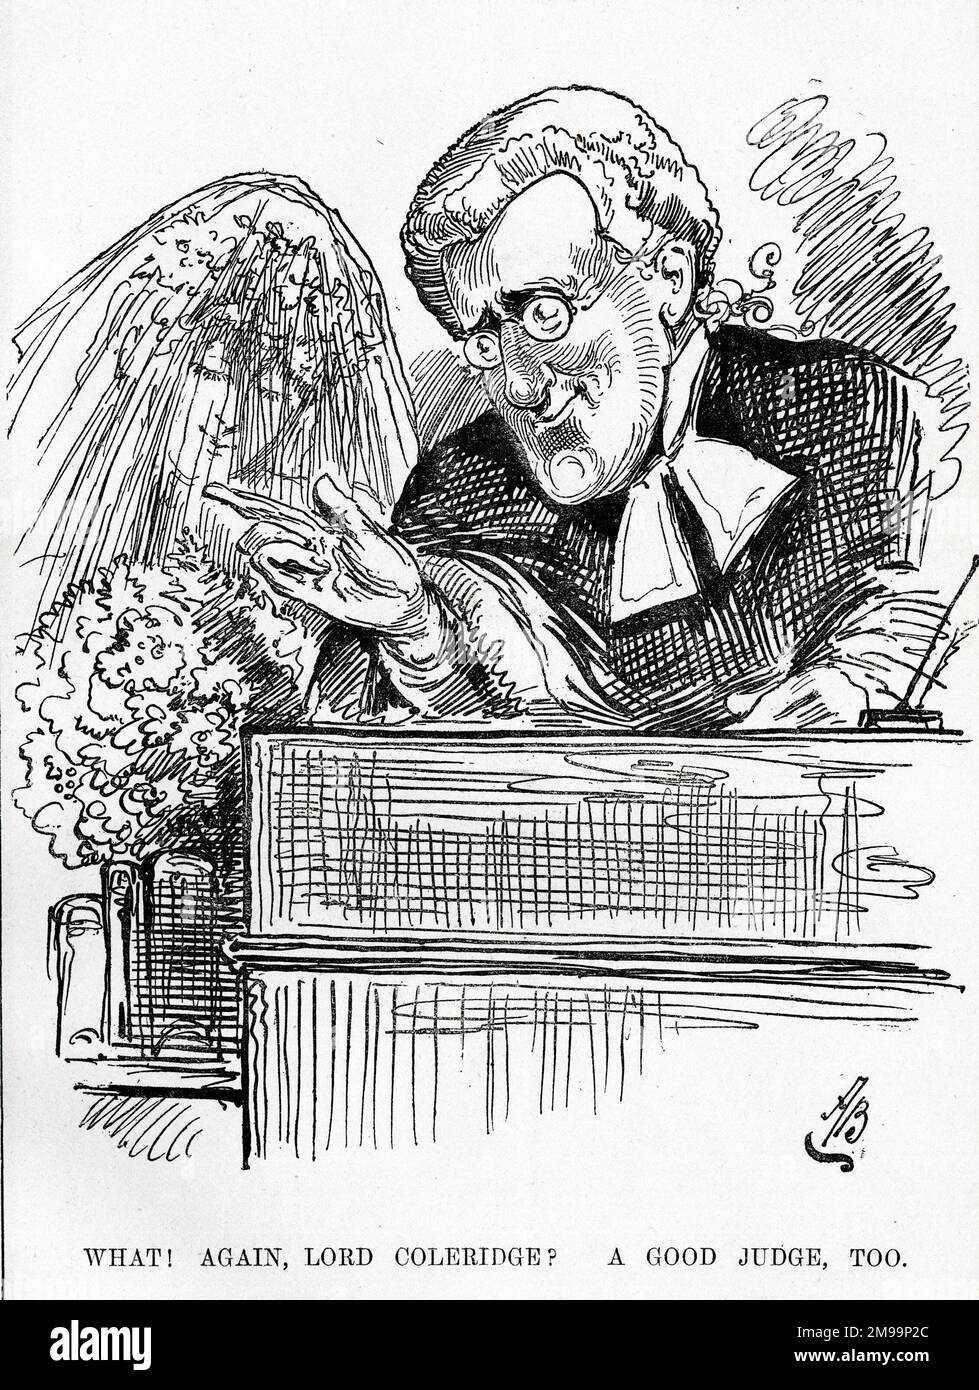 Cartoon, What! Again, Lord Coleridge? A Good Judge, Too. John Duke Coleridge, 1st Baron Coleridge (1820-1894), British lawyer, judge, and Lord Chief Justice of England. His first wife died in 1878, and he married again in 1885 - seen here with his new bride, Amy Augusta Jackson Lawford. Stock Photo